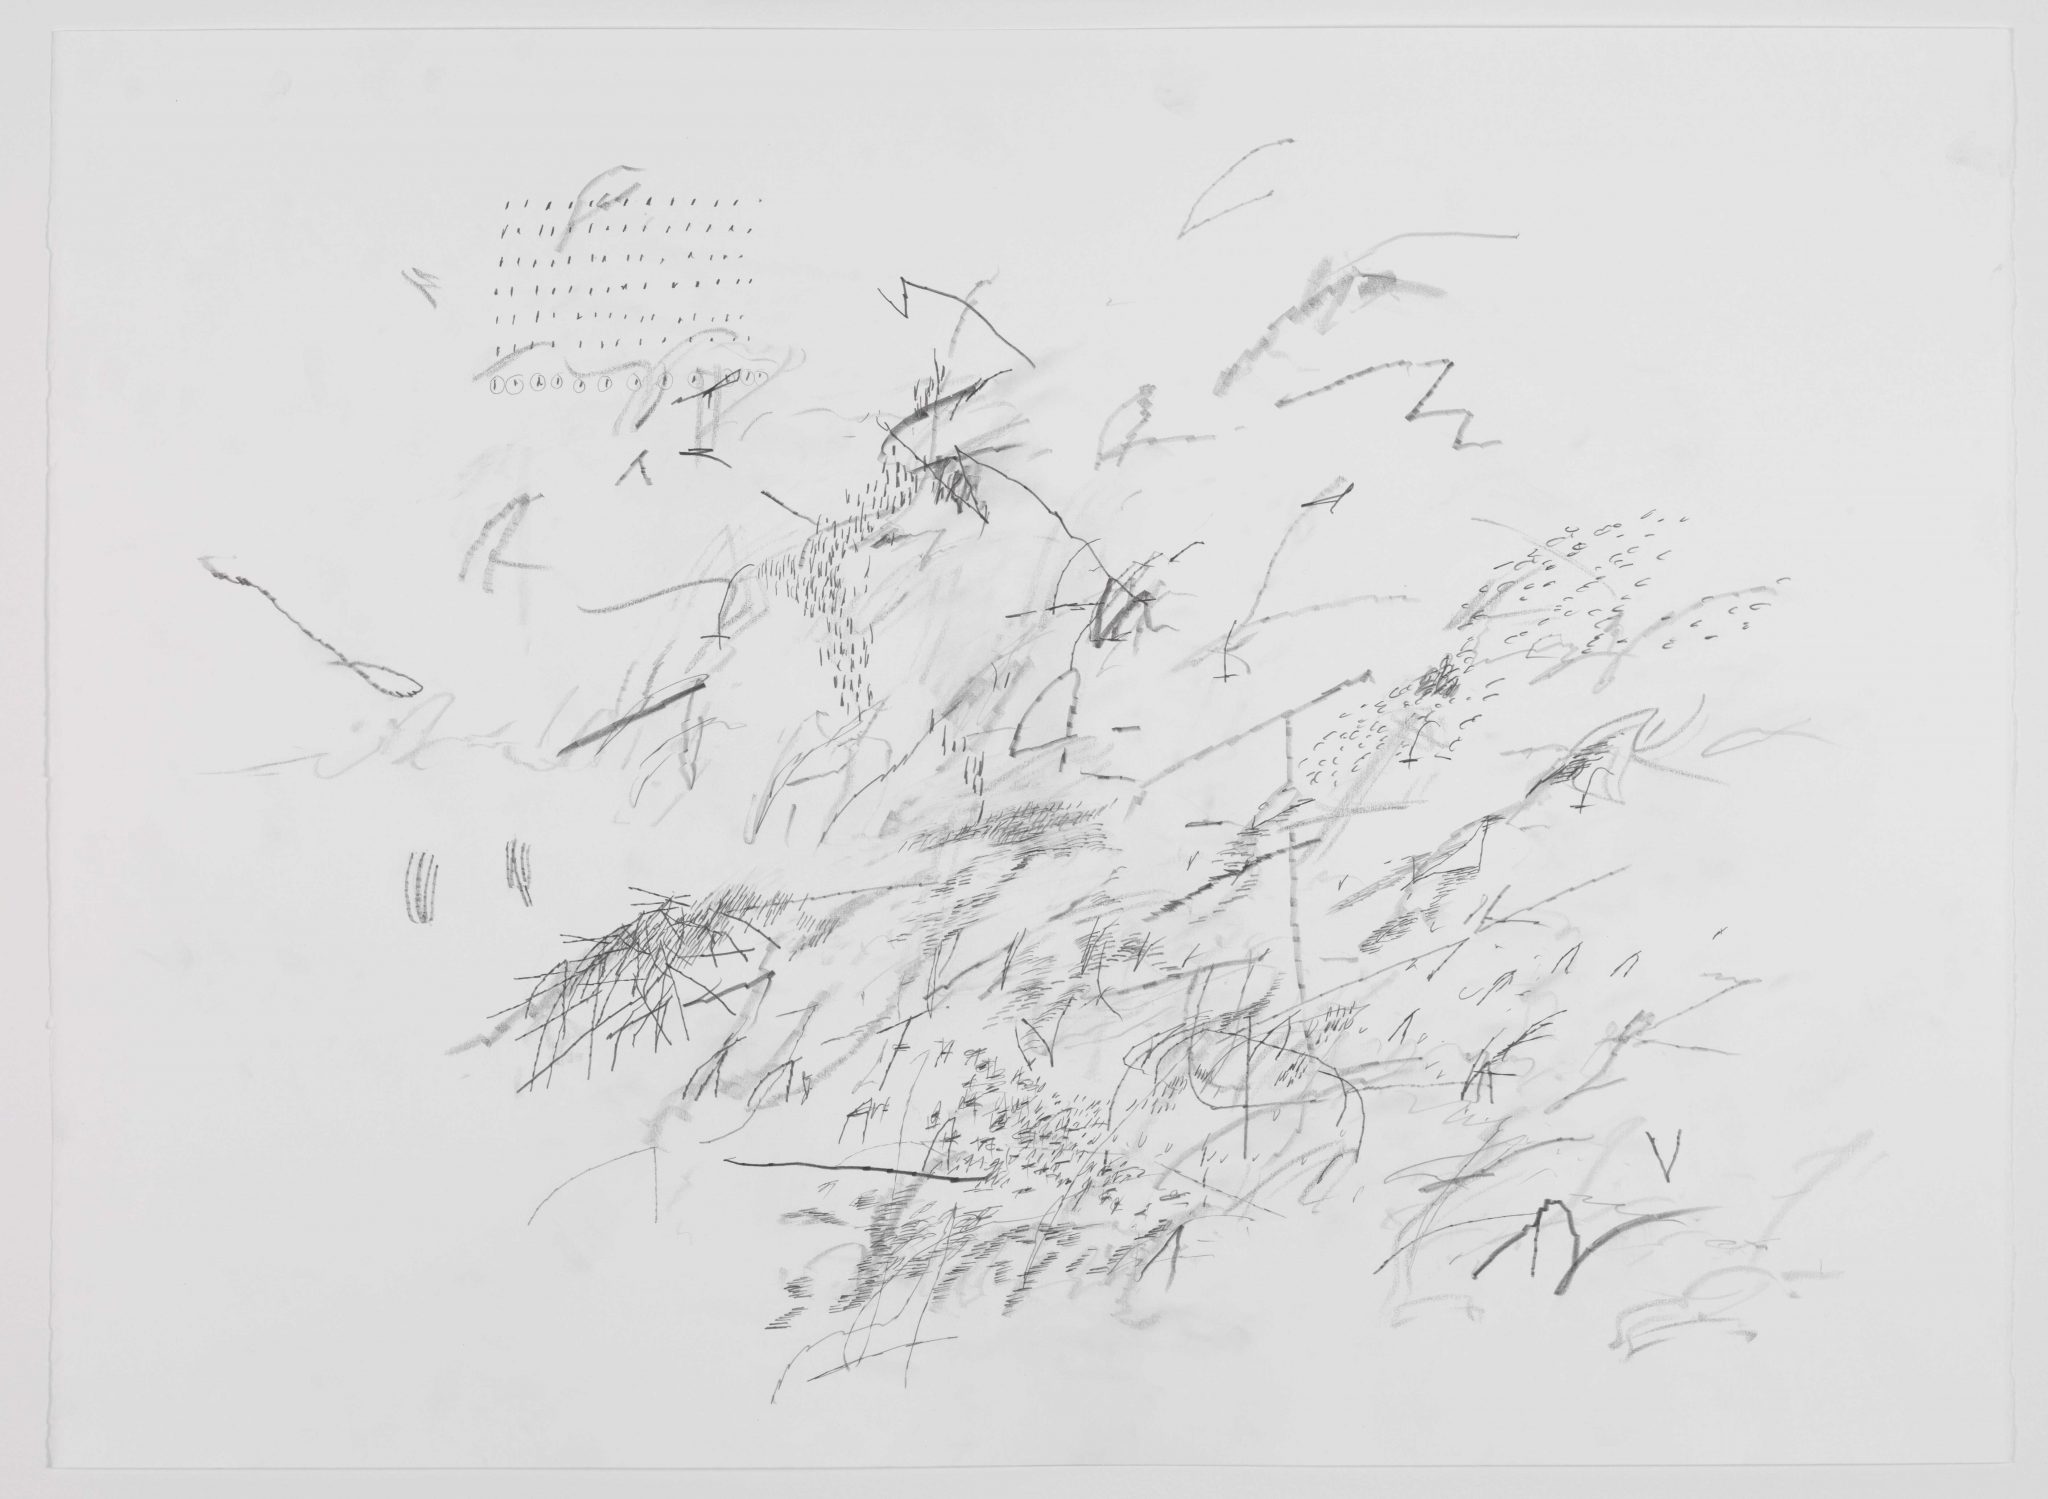 Mind Breath Drawing, 2012, graphite on paper. Courtesy the artist and Marian Goodman Gallery, Paris & New York